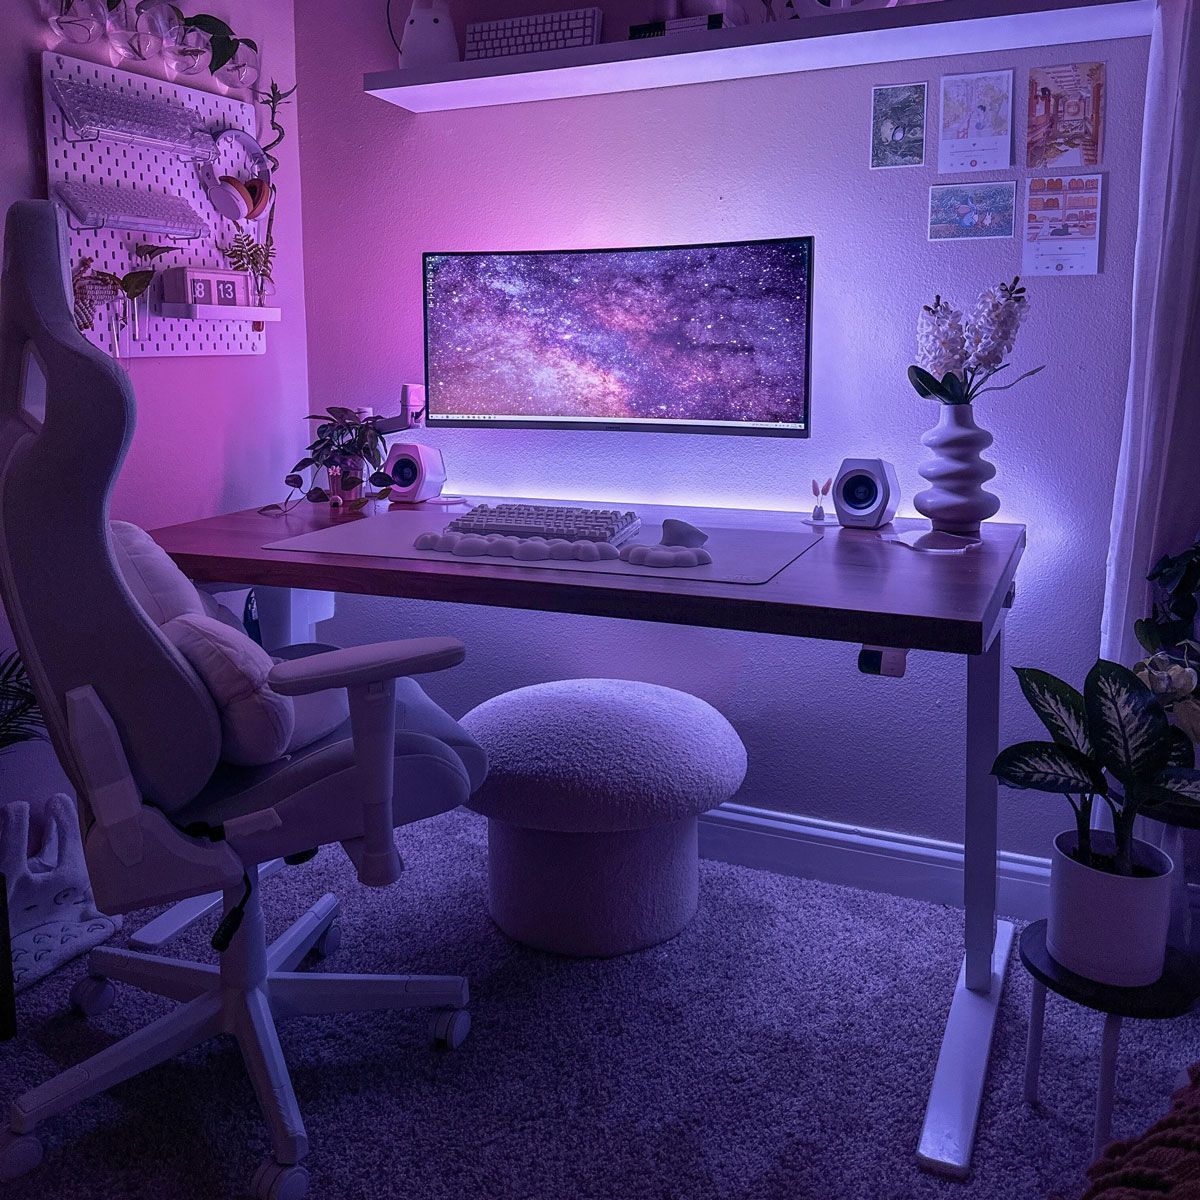 Ready for UPLIFToff? @crossingani_'s out-of-this-world setup features a 1.75' thick, wide plank solid walnut desktop and the award-winning UPLIFT V2 Standing Desk frame. Take to the stars with a heavenly workspace all your own. Create your dream desk now. buff.ly/45YAh0l